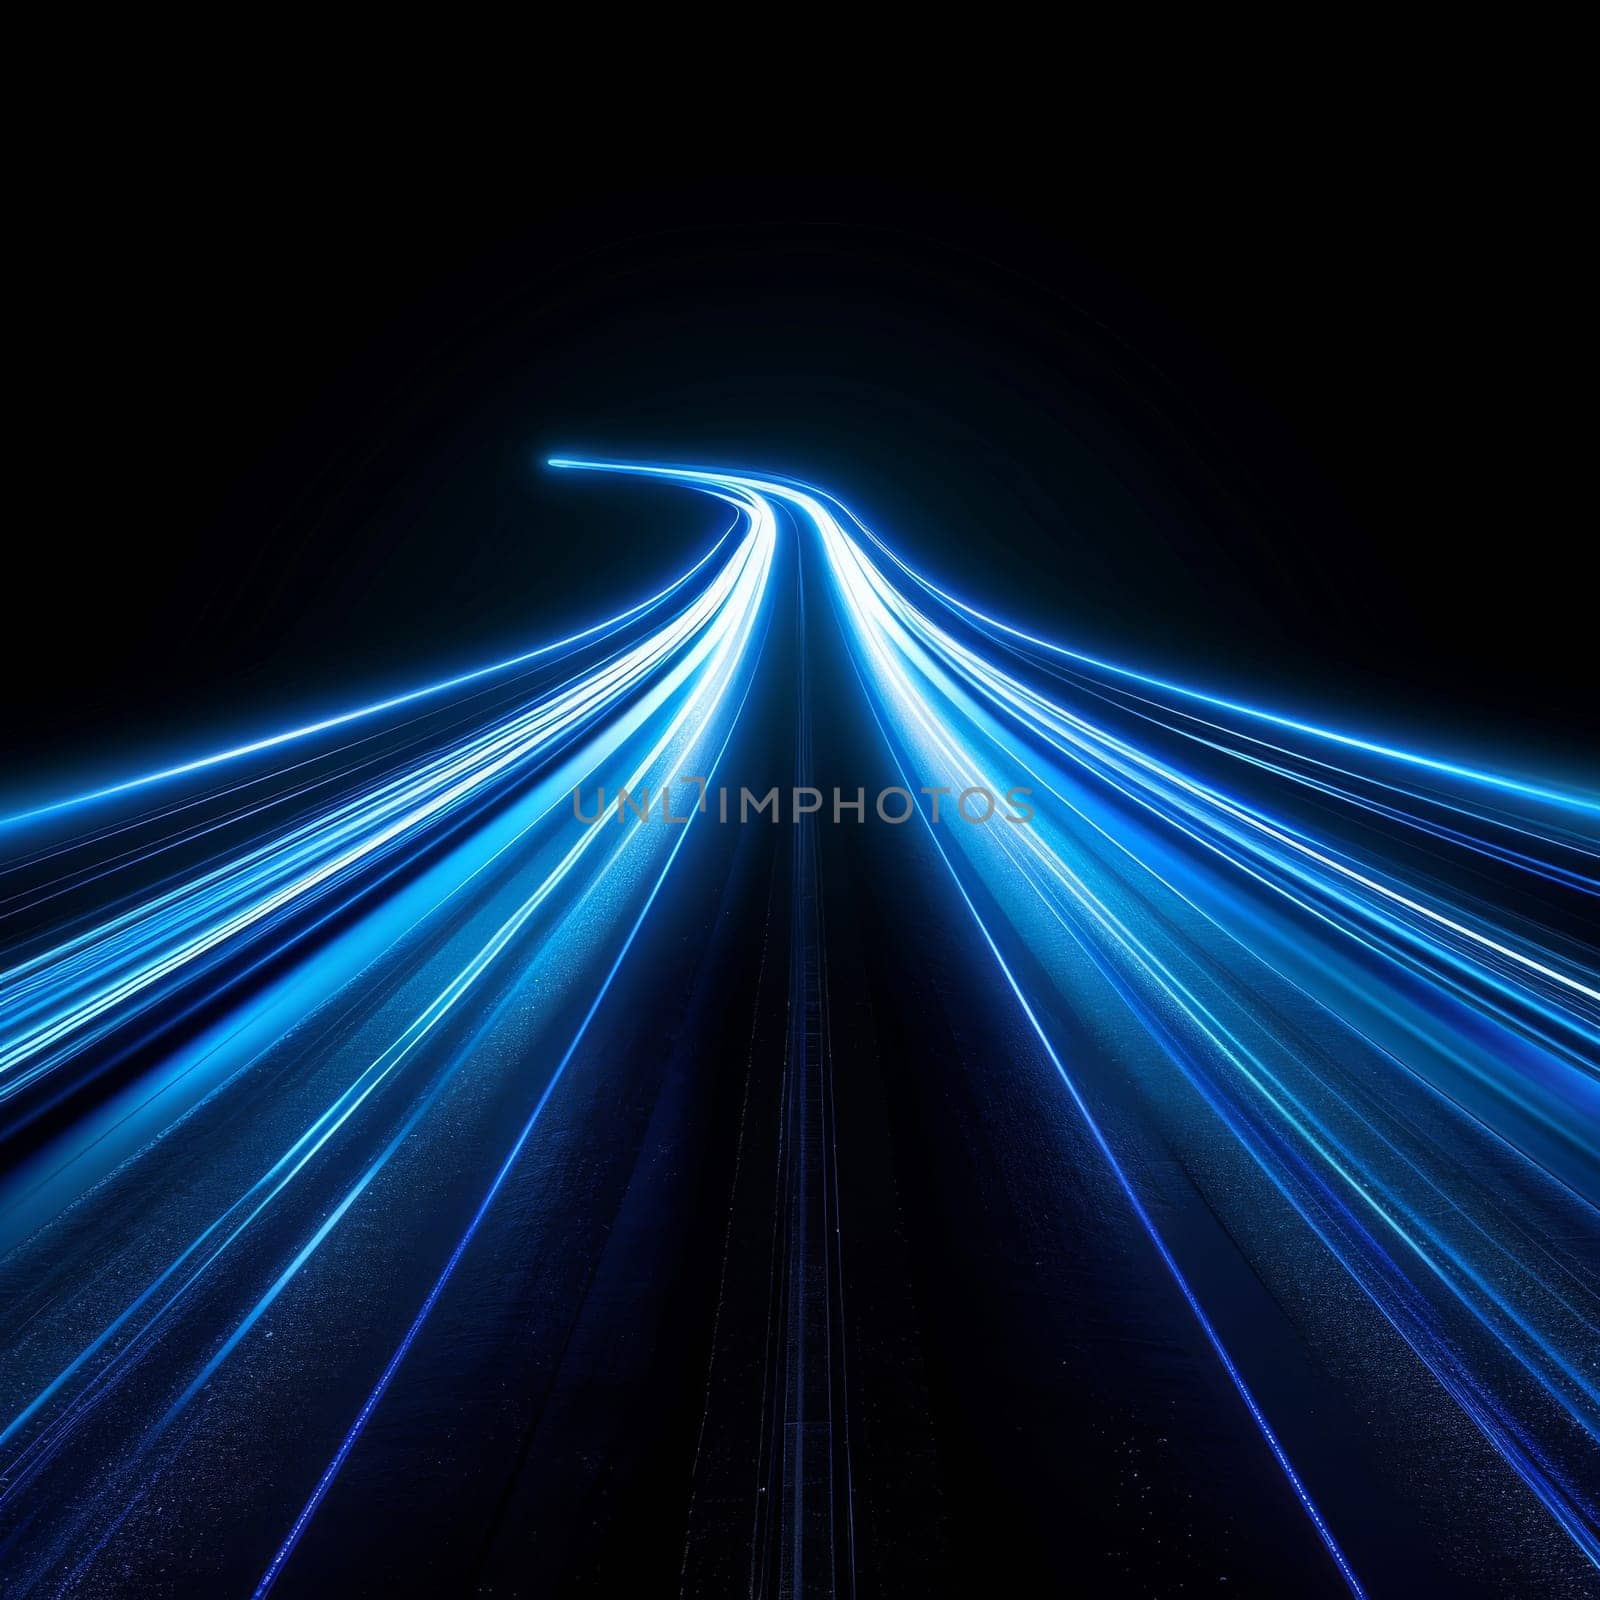 A long blue line with a bright light in the middle. The line is curved and he is moving